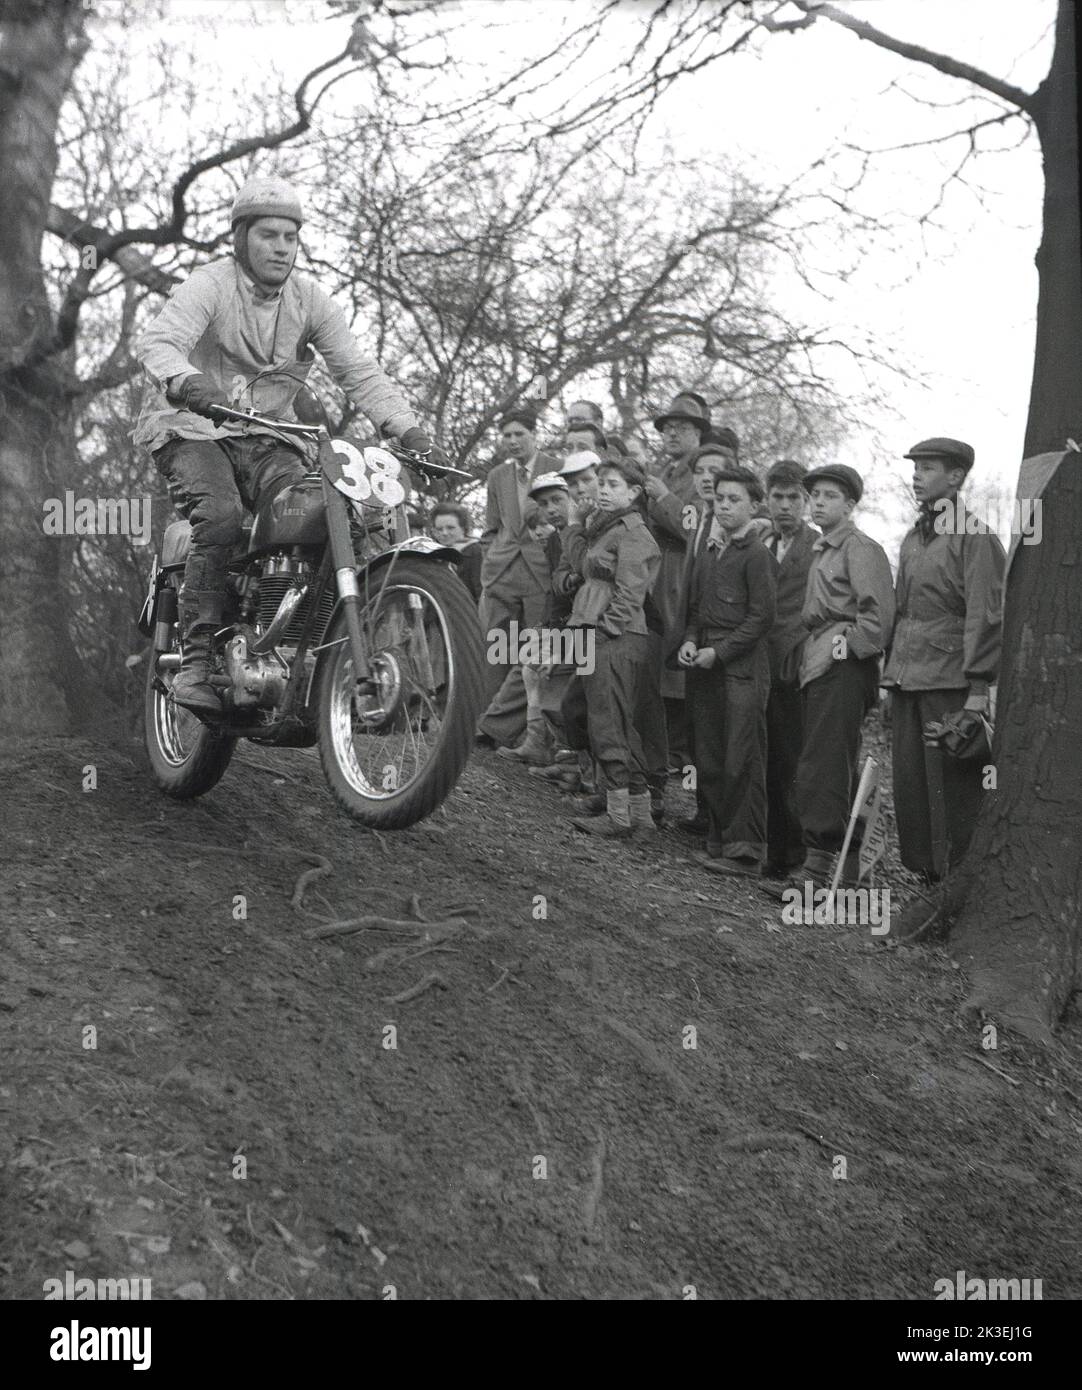 1954, historical, outside on rough terrain in a forest, spectators watching competitor 38 riding a motorcycle of the era, possiblly an Ariel, in a scramble or trial race at Seacroft, Leeds, England, UK, organised by the West Leeds Motor Club. Stock Photo